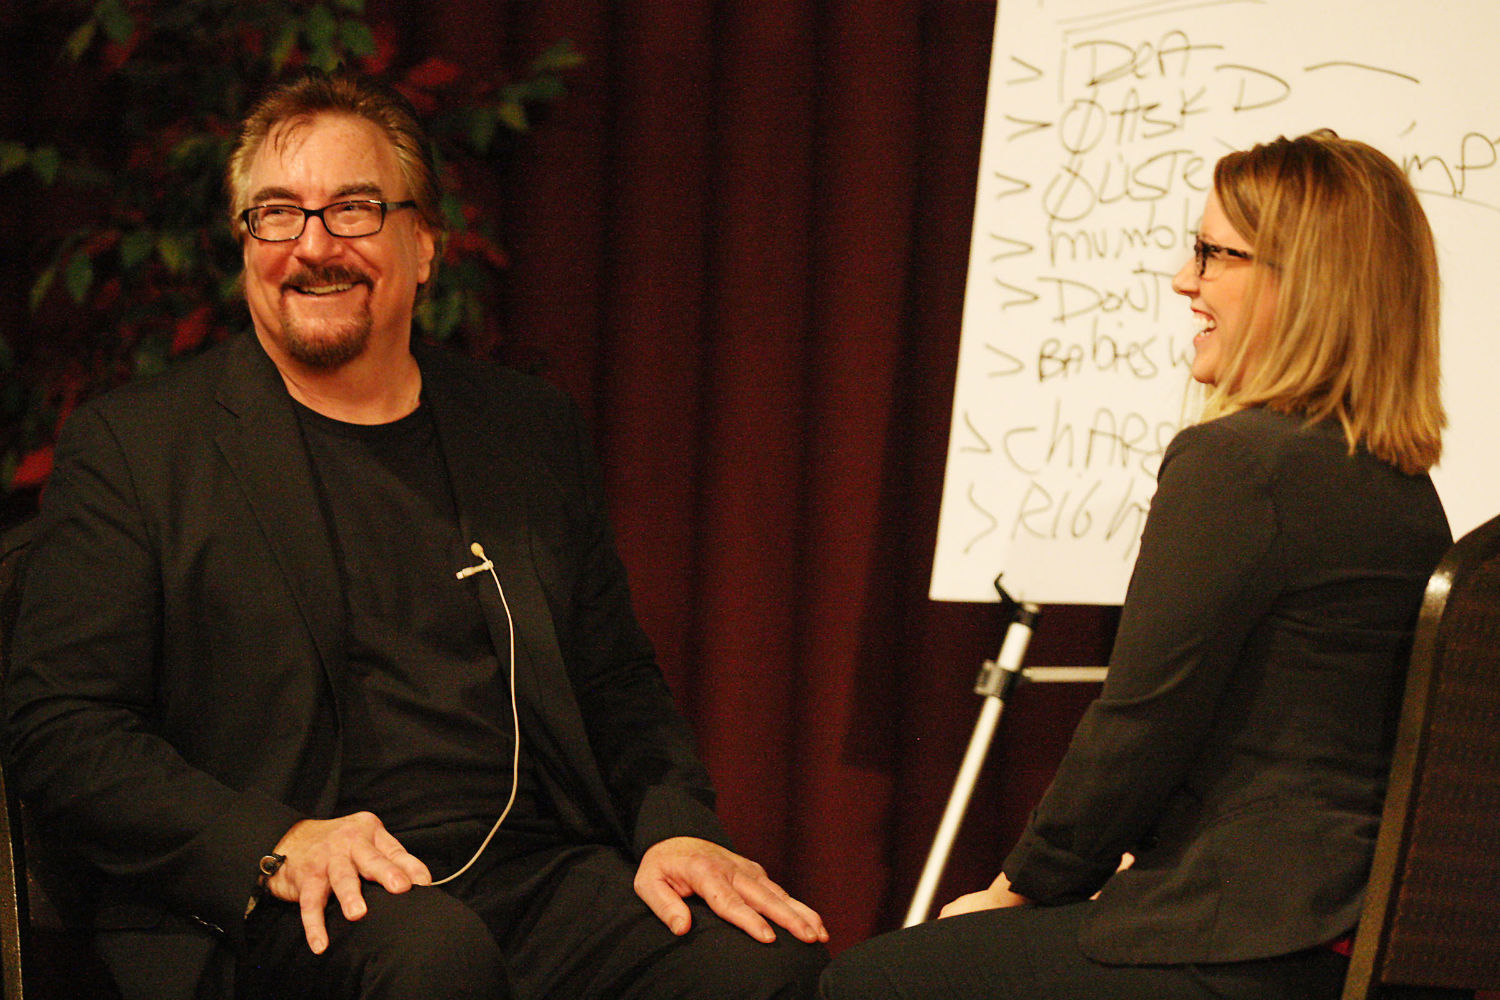 bruce christopher humorist speaker with woman